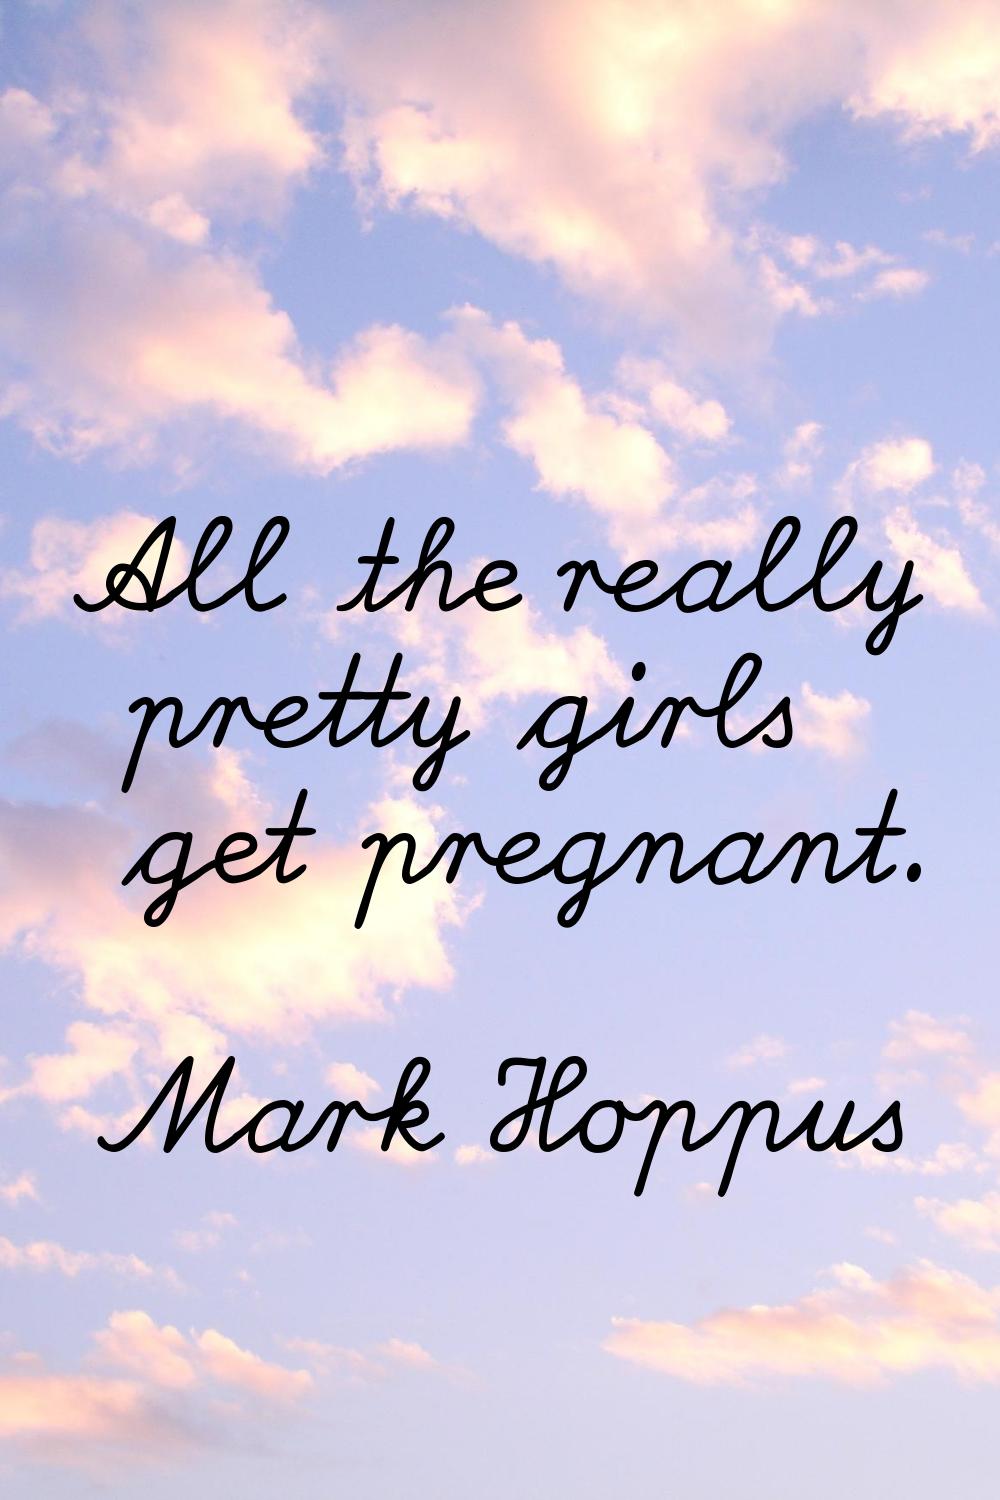 All the really pretty girls get pregnant.